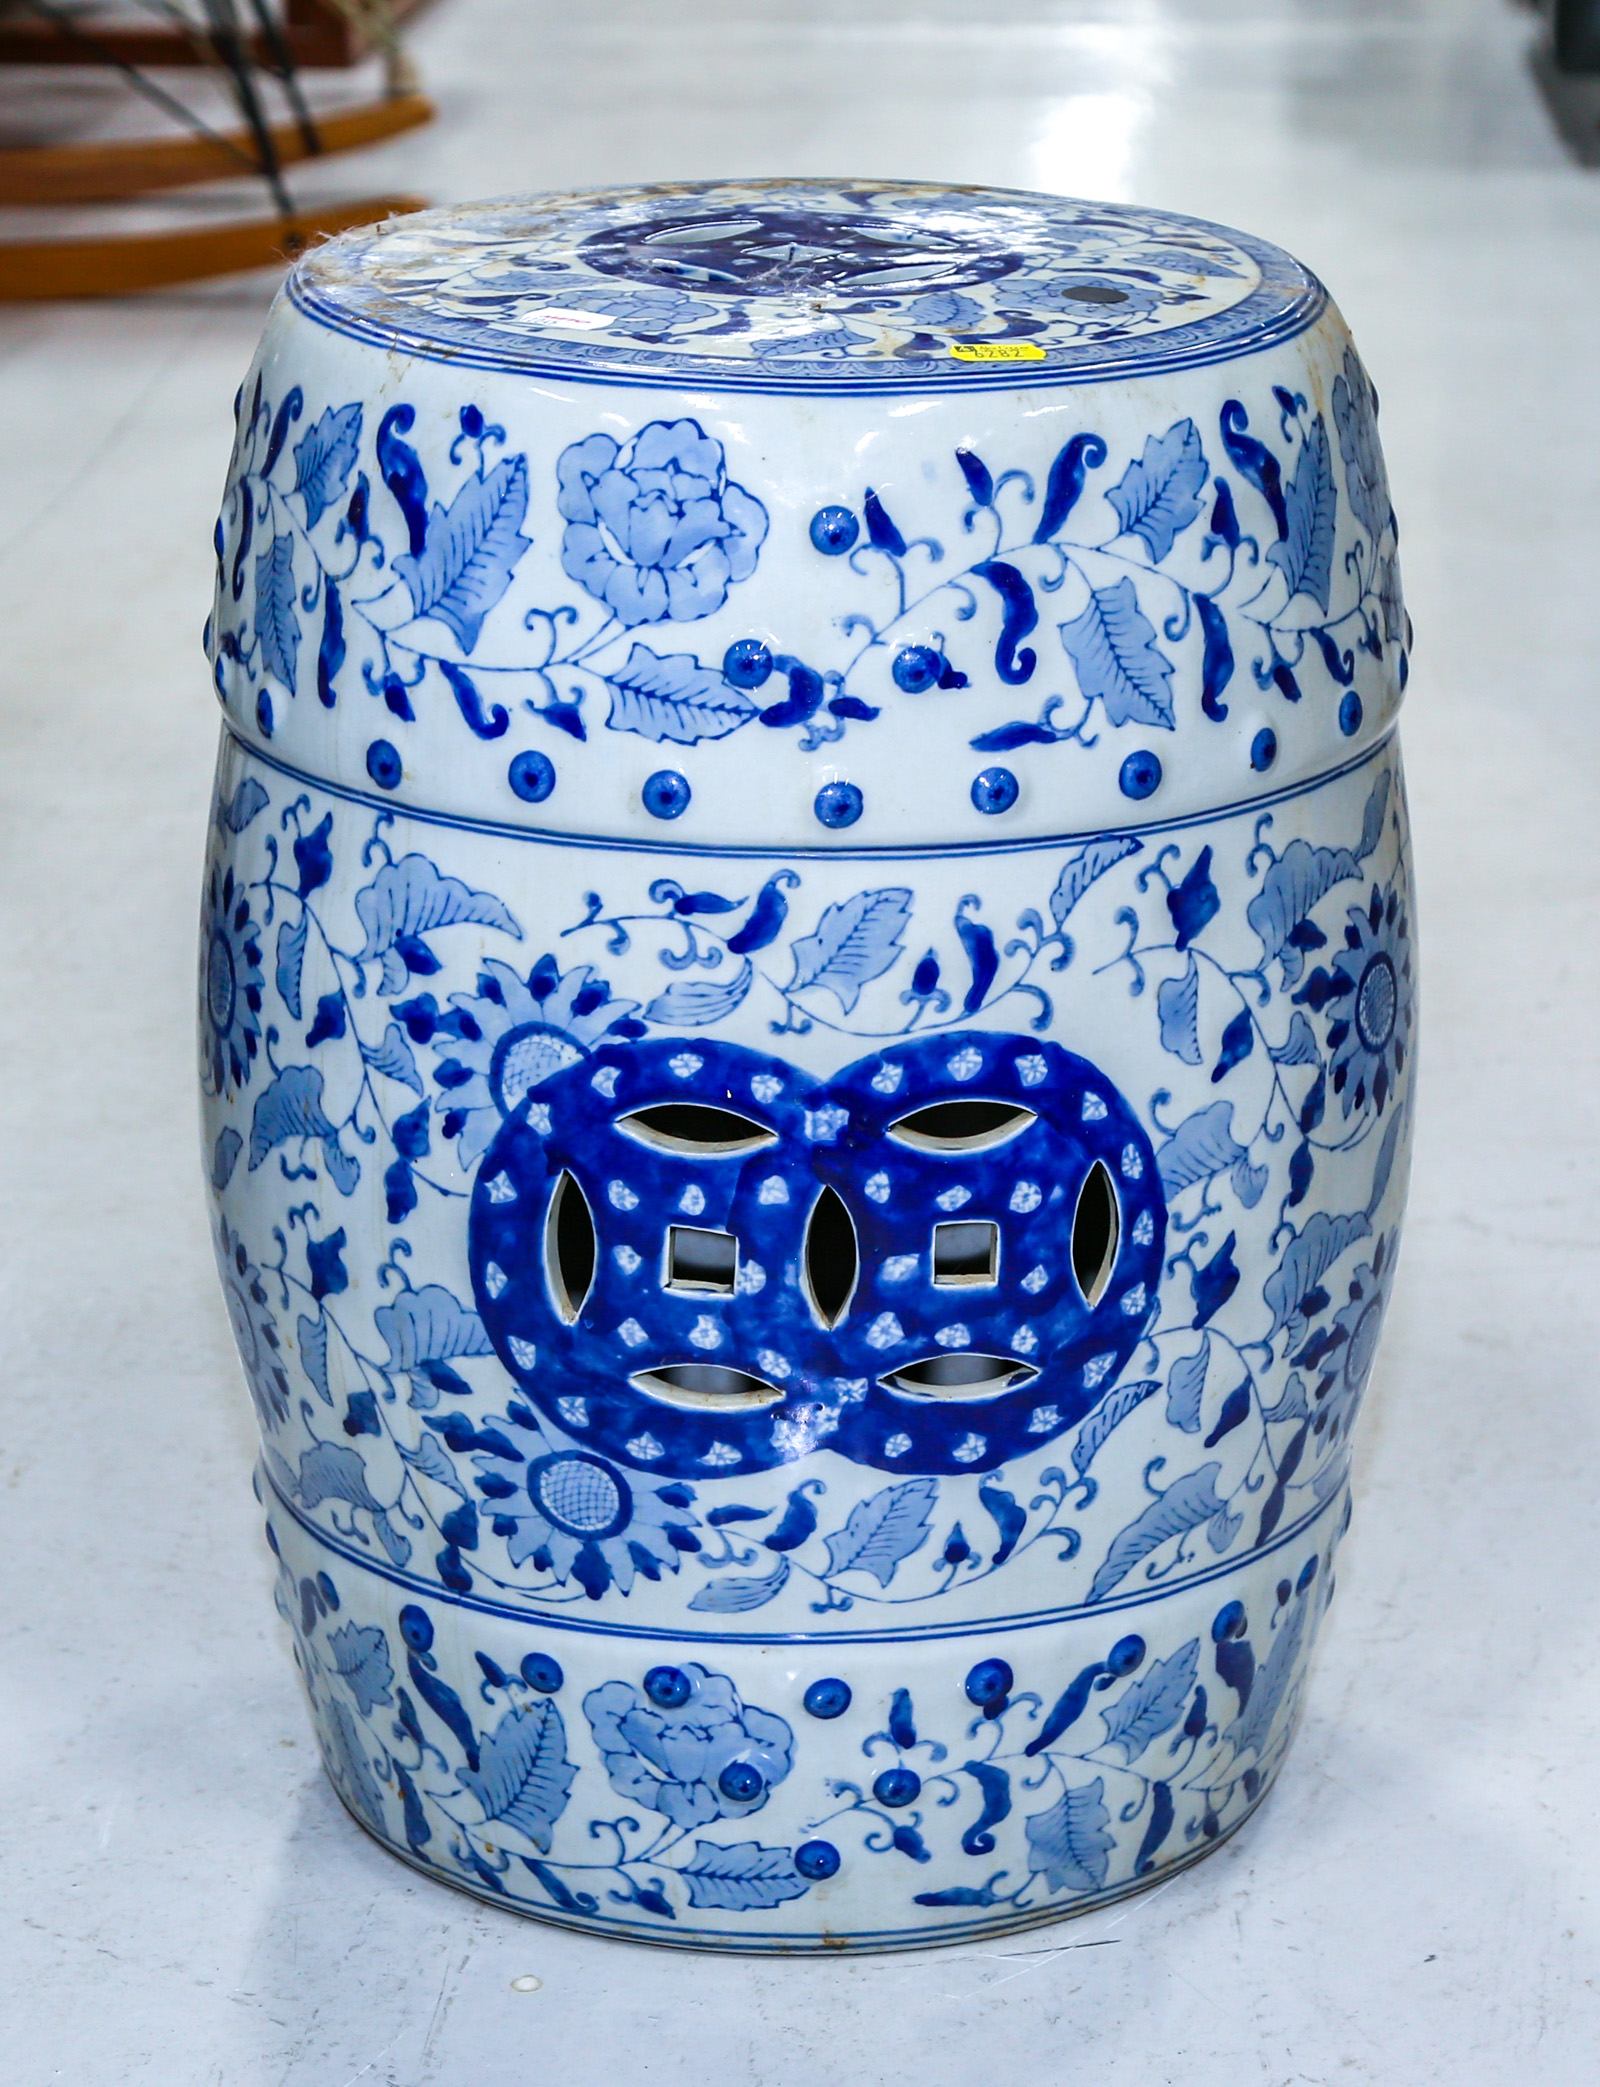 A CHINESE BLUE & WHITE PORCELAIN